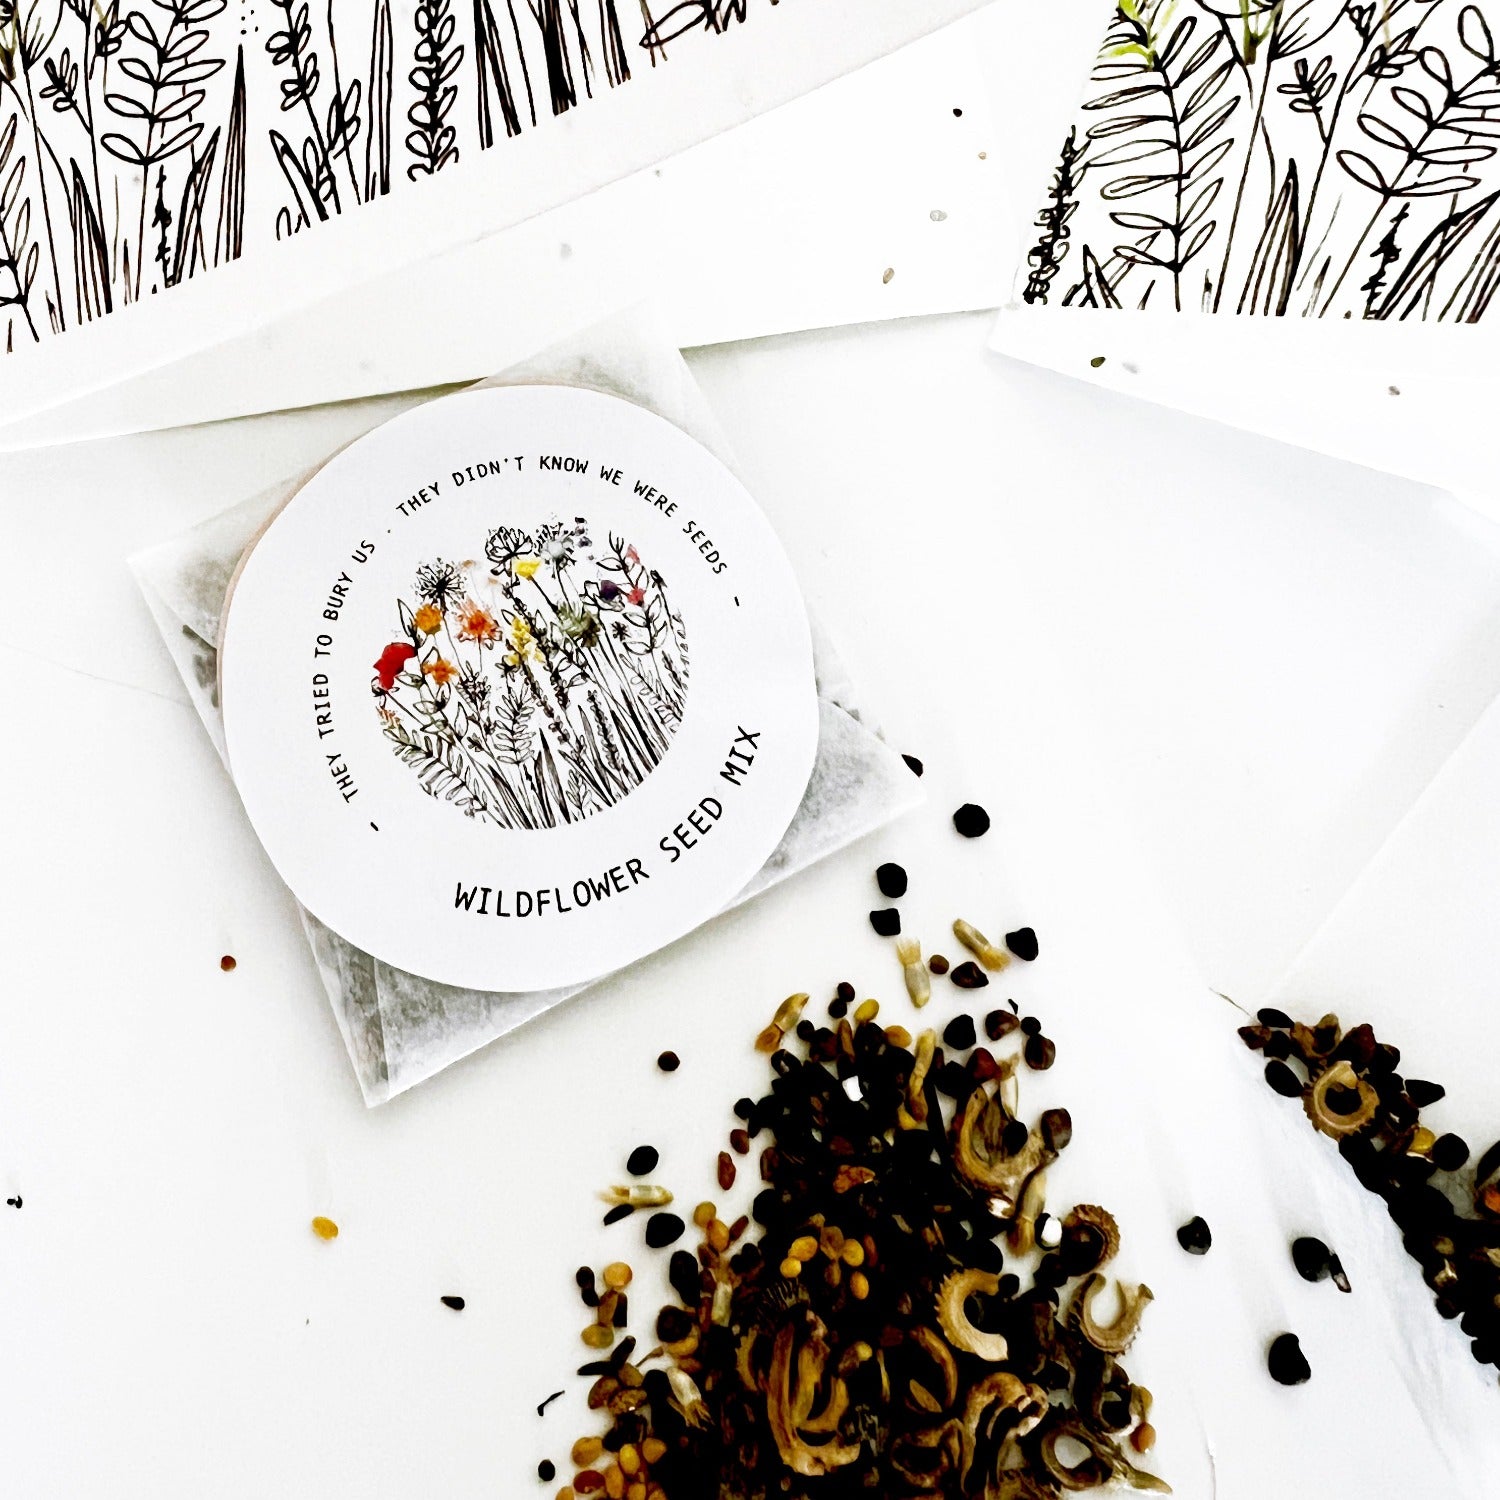 Bees wildflower meadow flower seed mix | To create a little meadow flower patch